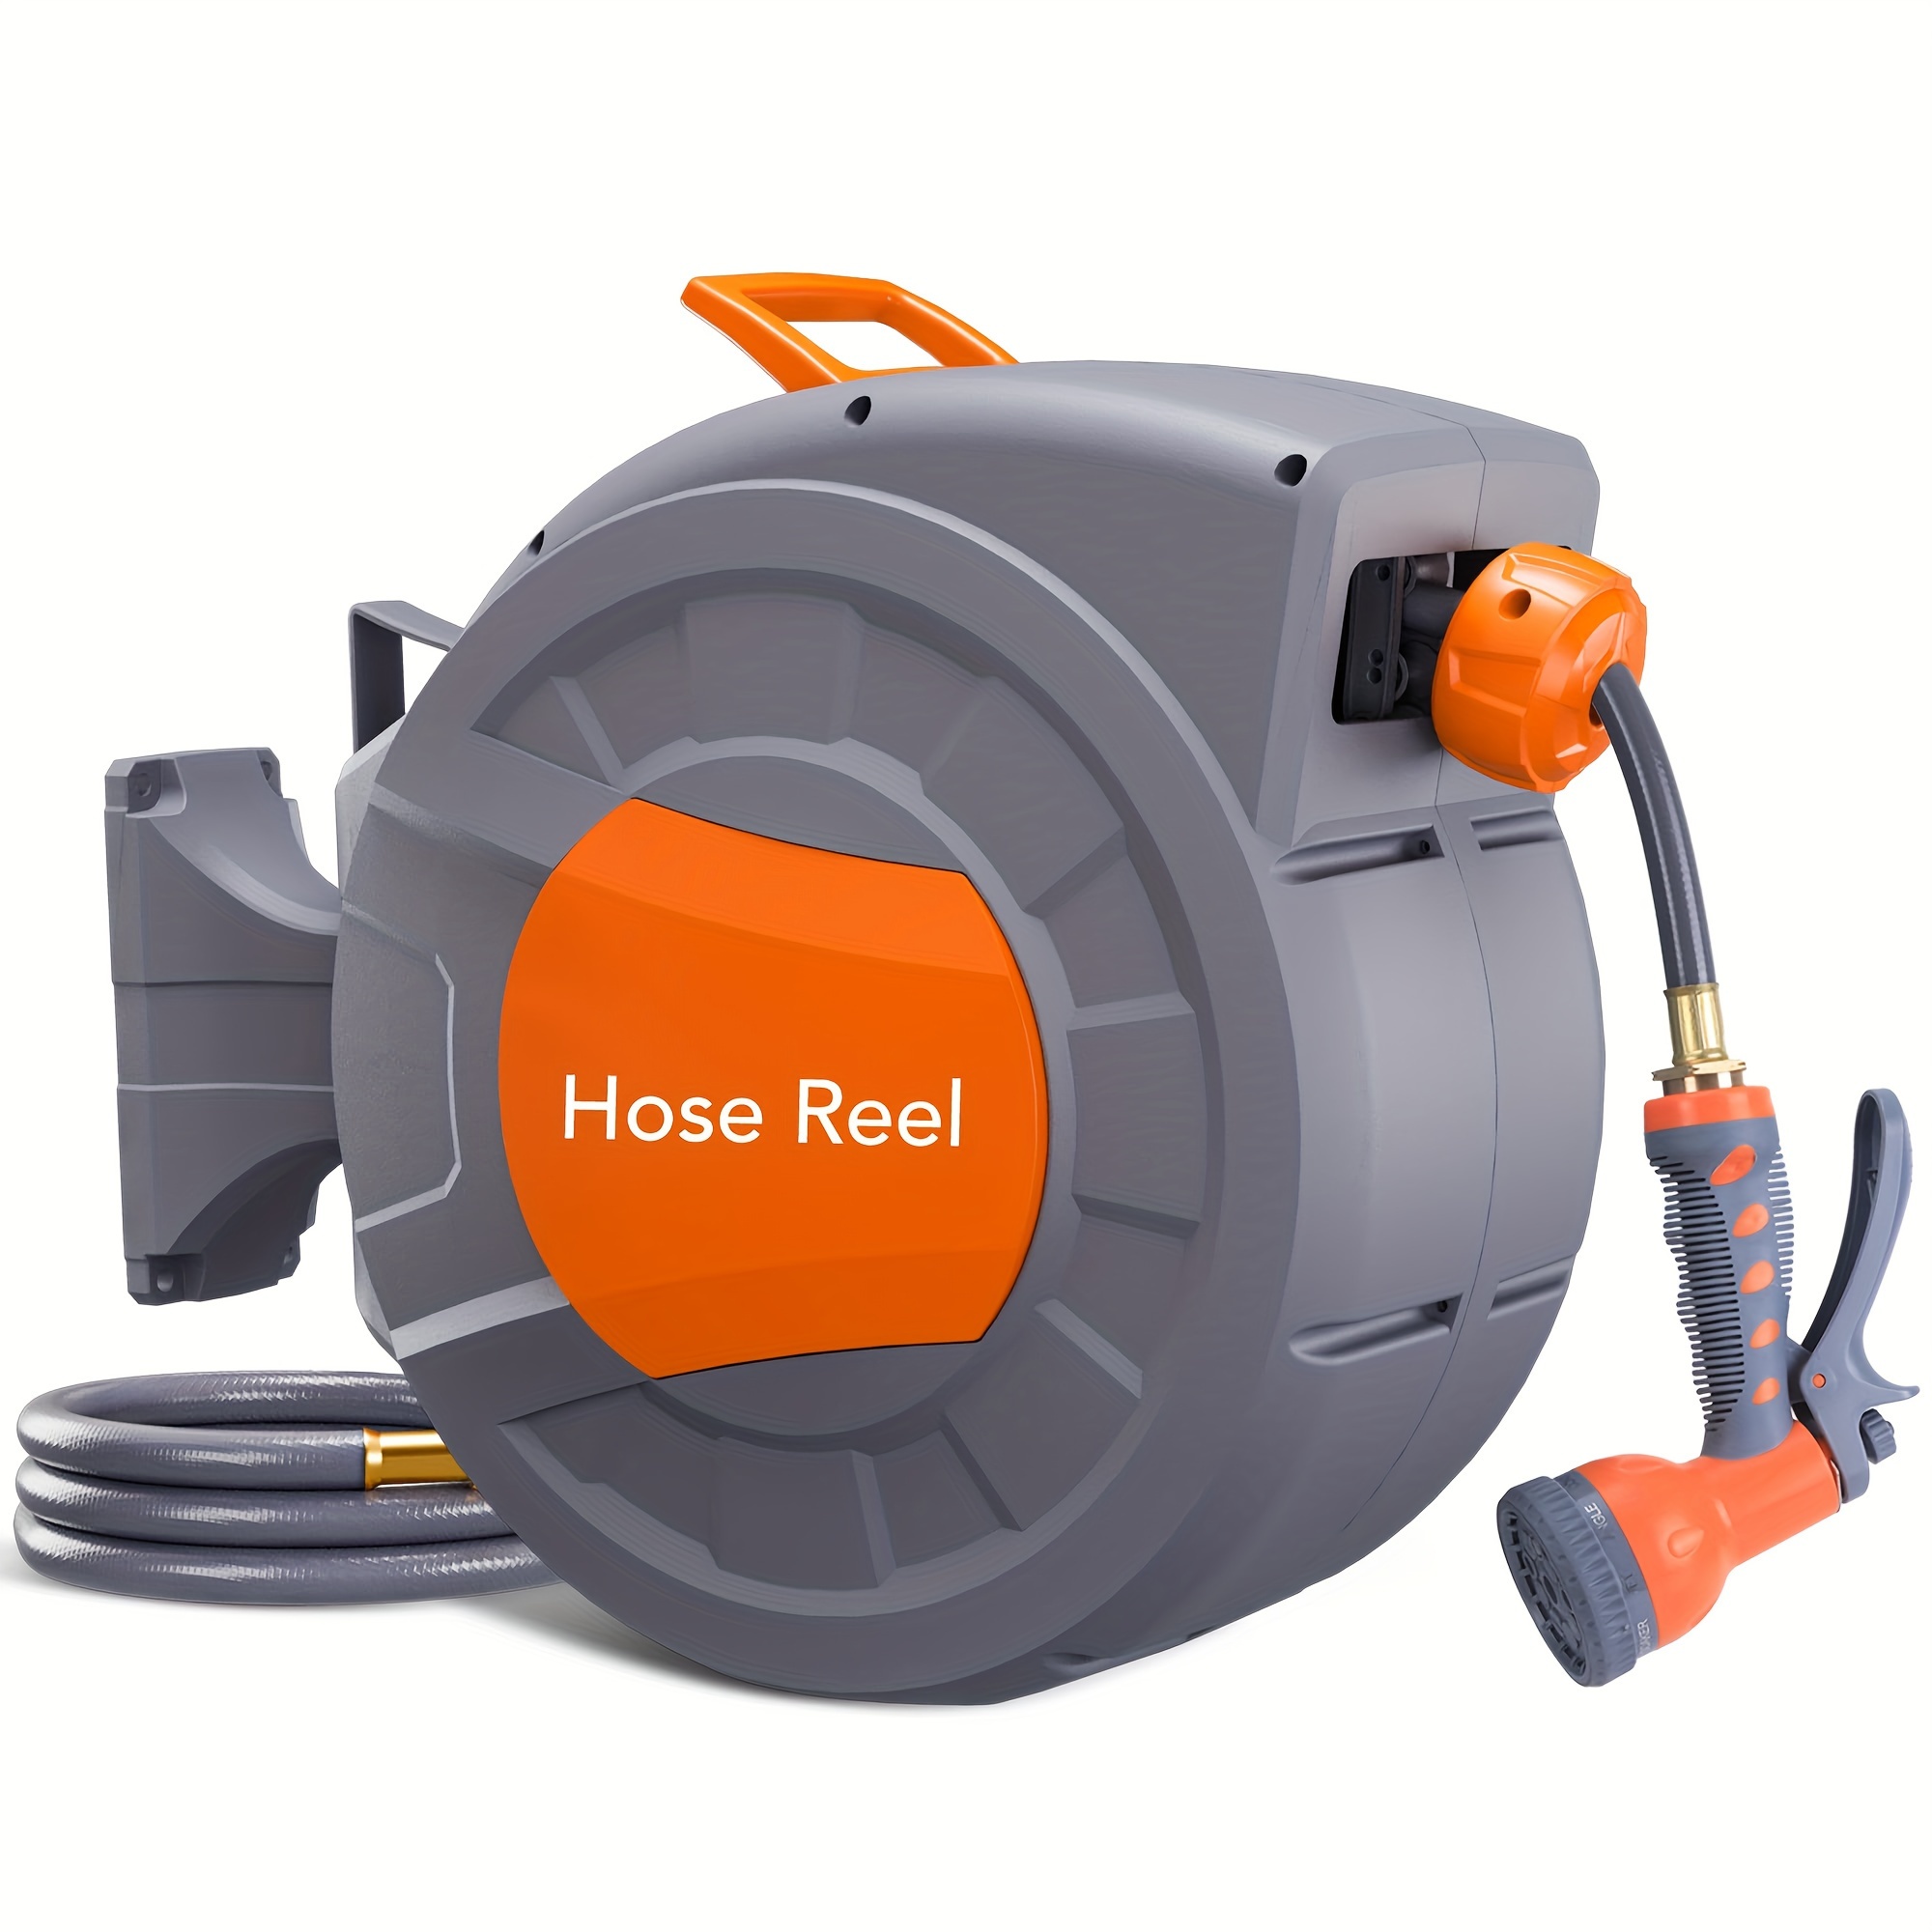 

Retractable Garden Hose Reel - 1/2 In X 72 Ft, Wall Mounted, 9-function Sprayer, Any Length Lock, 180° Swivel, Automatic Slow Rewind